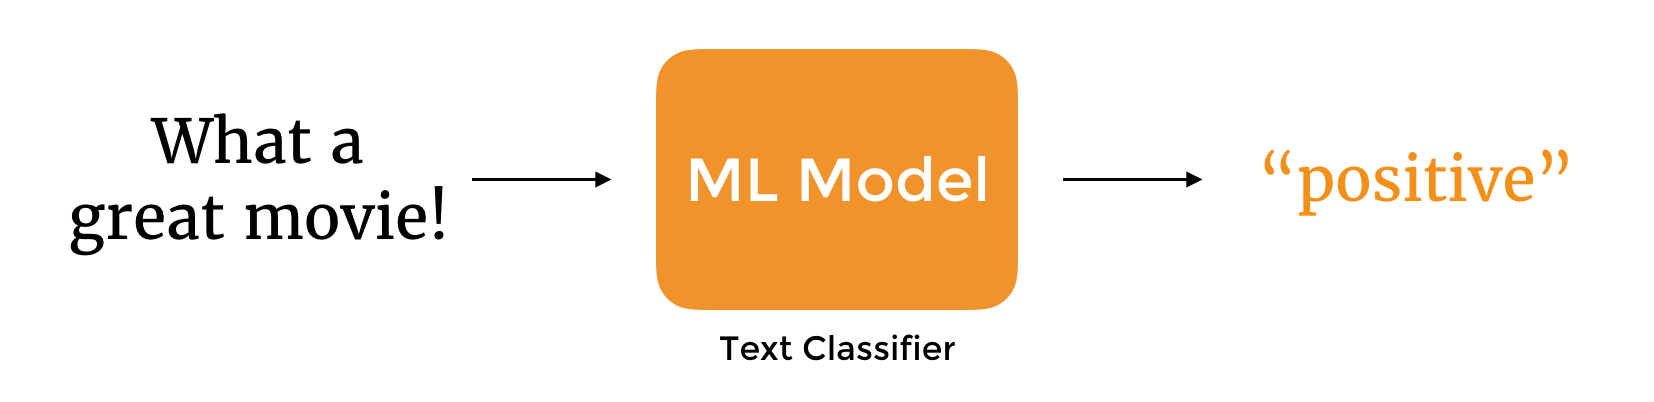 Figure 44.1. How the text classifer works